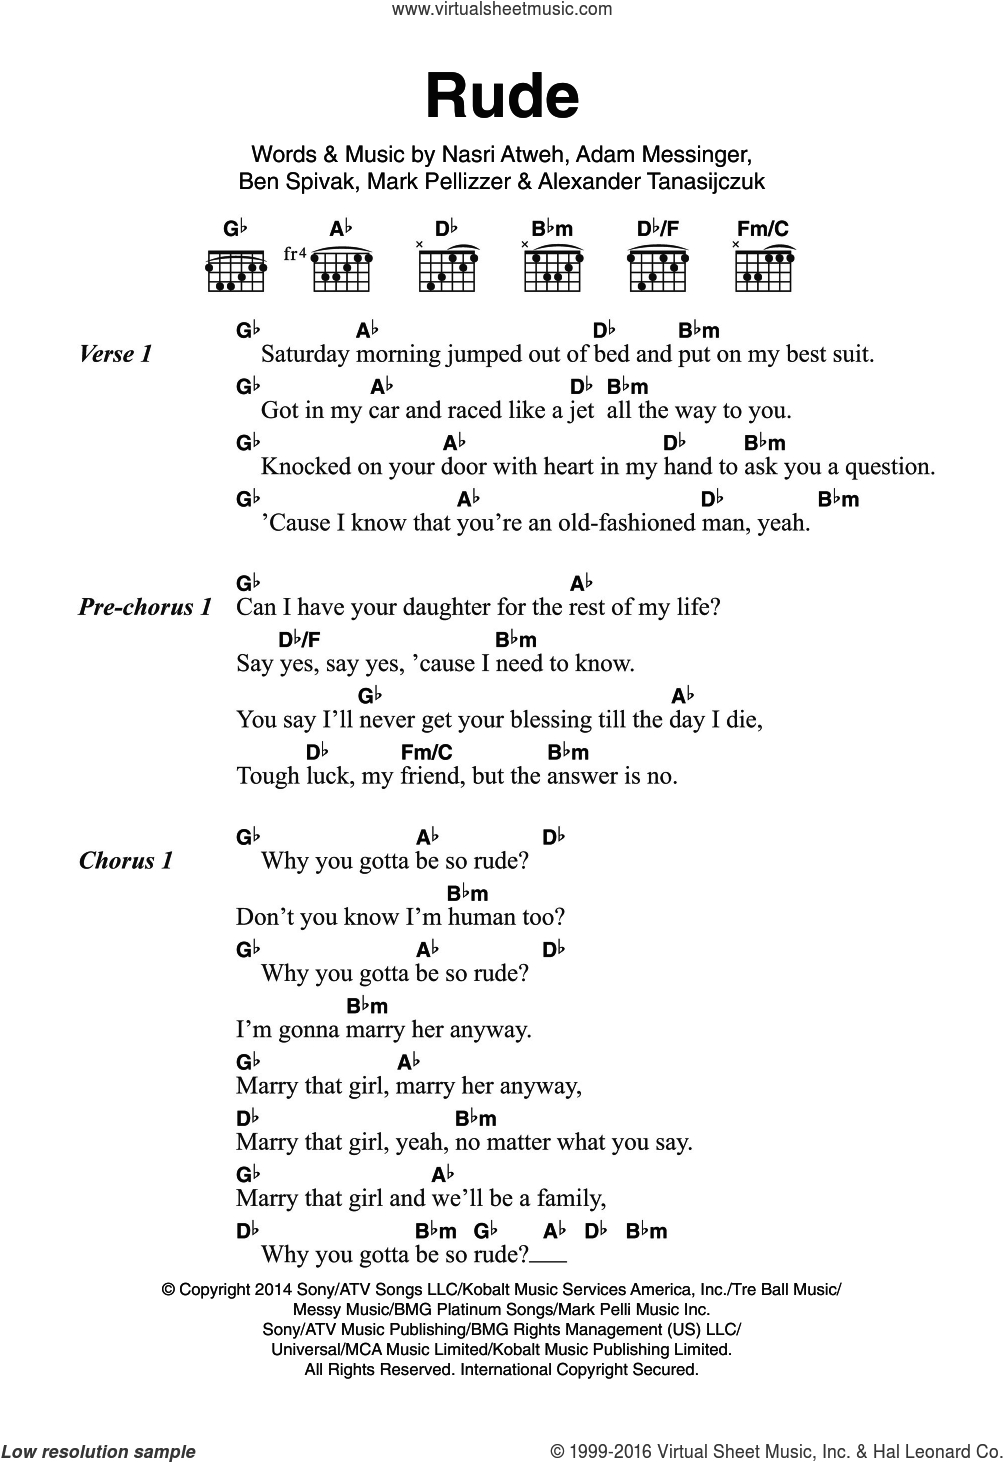 First Day Of My Life Chords Magic Rude Sheet Music For Guitar Chords Pdf